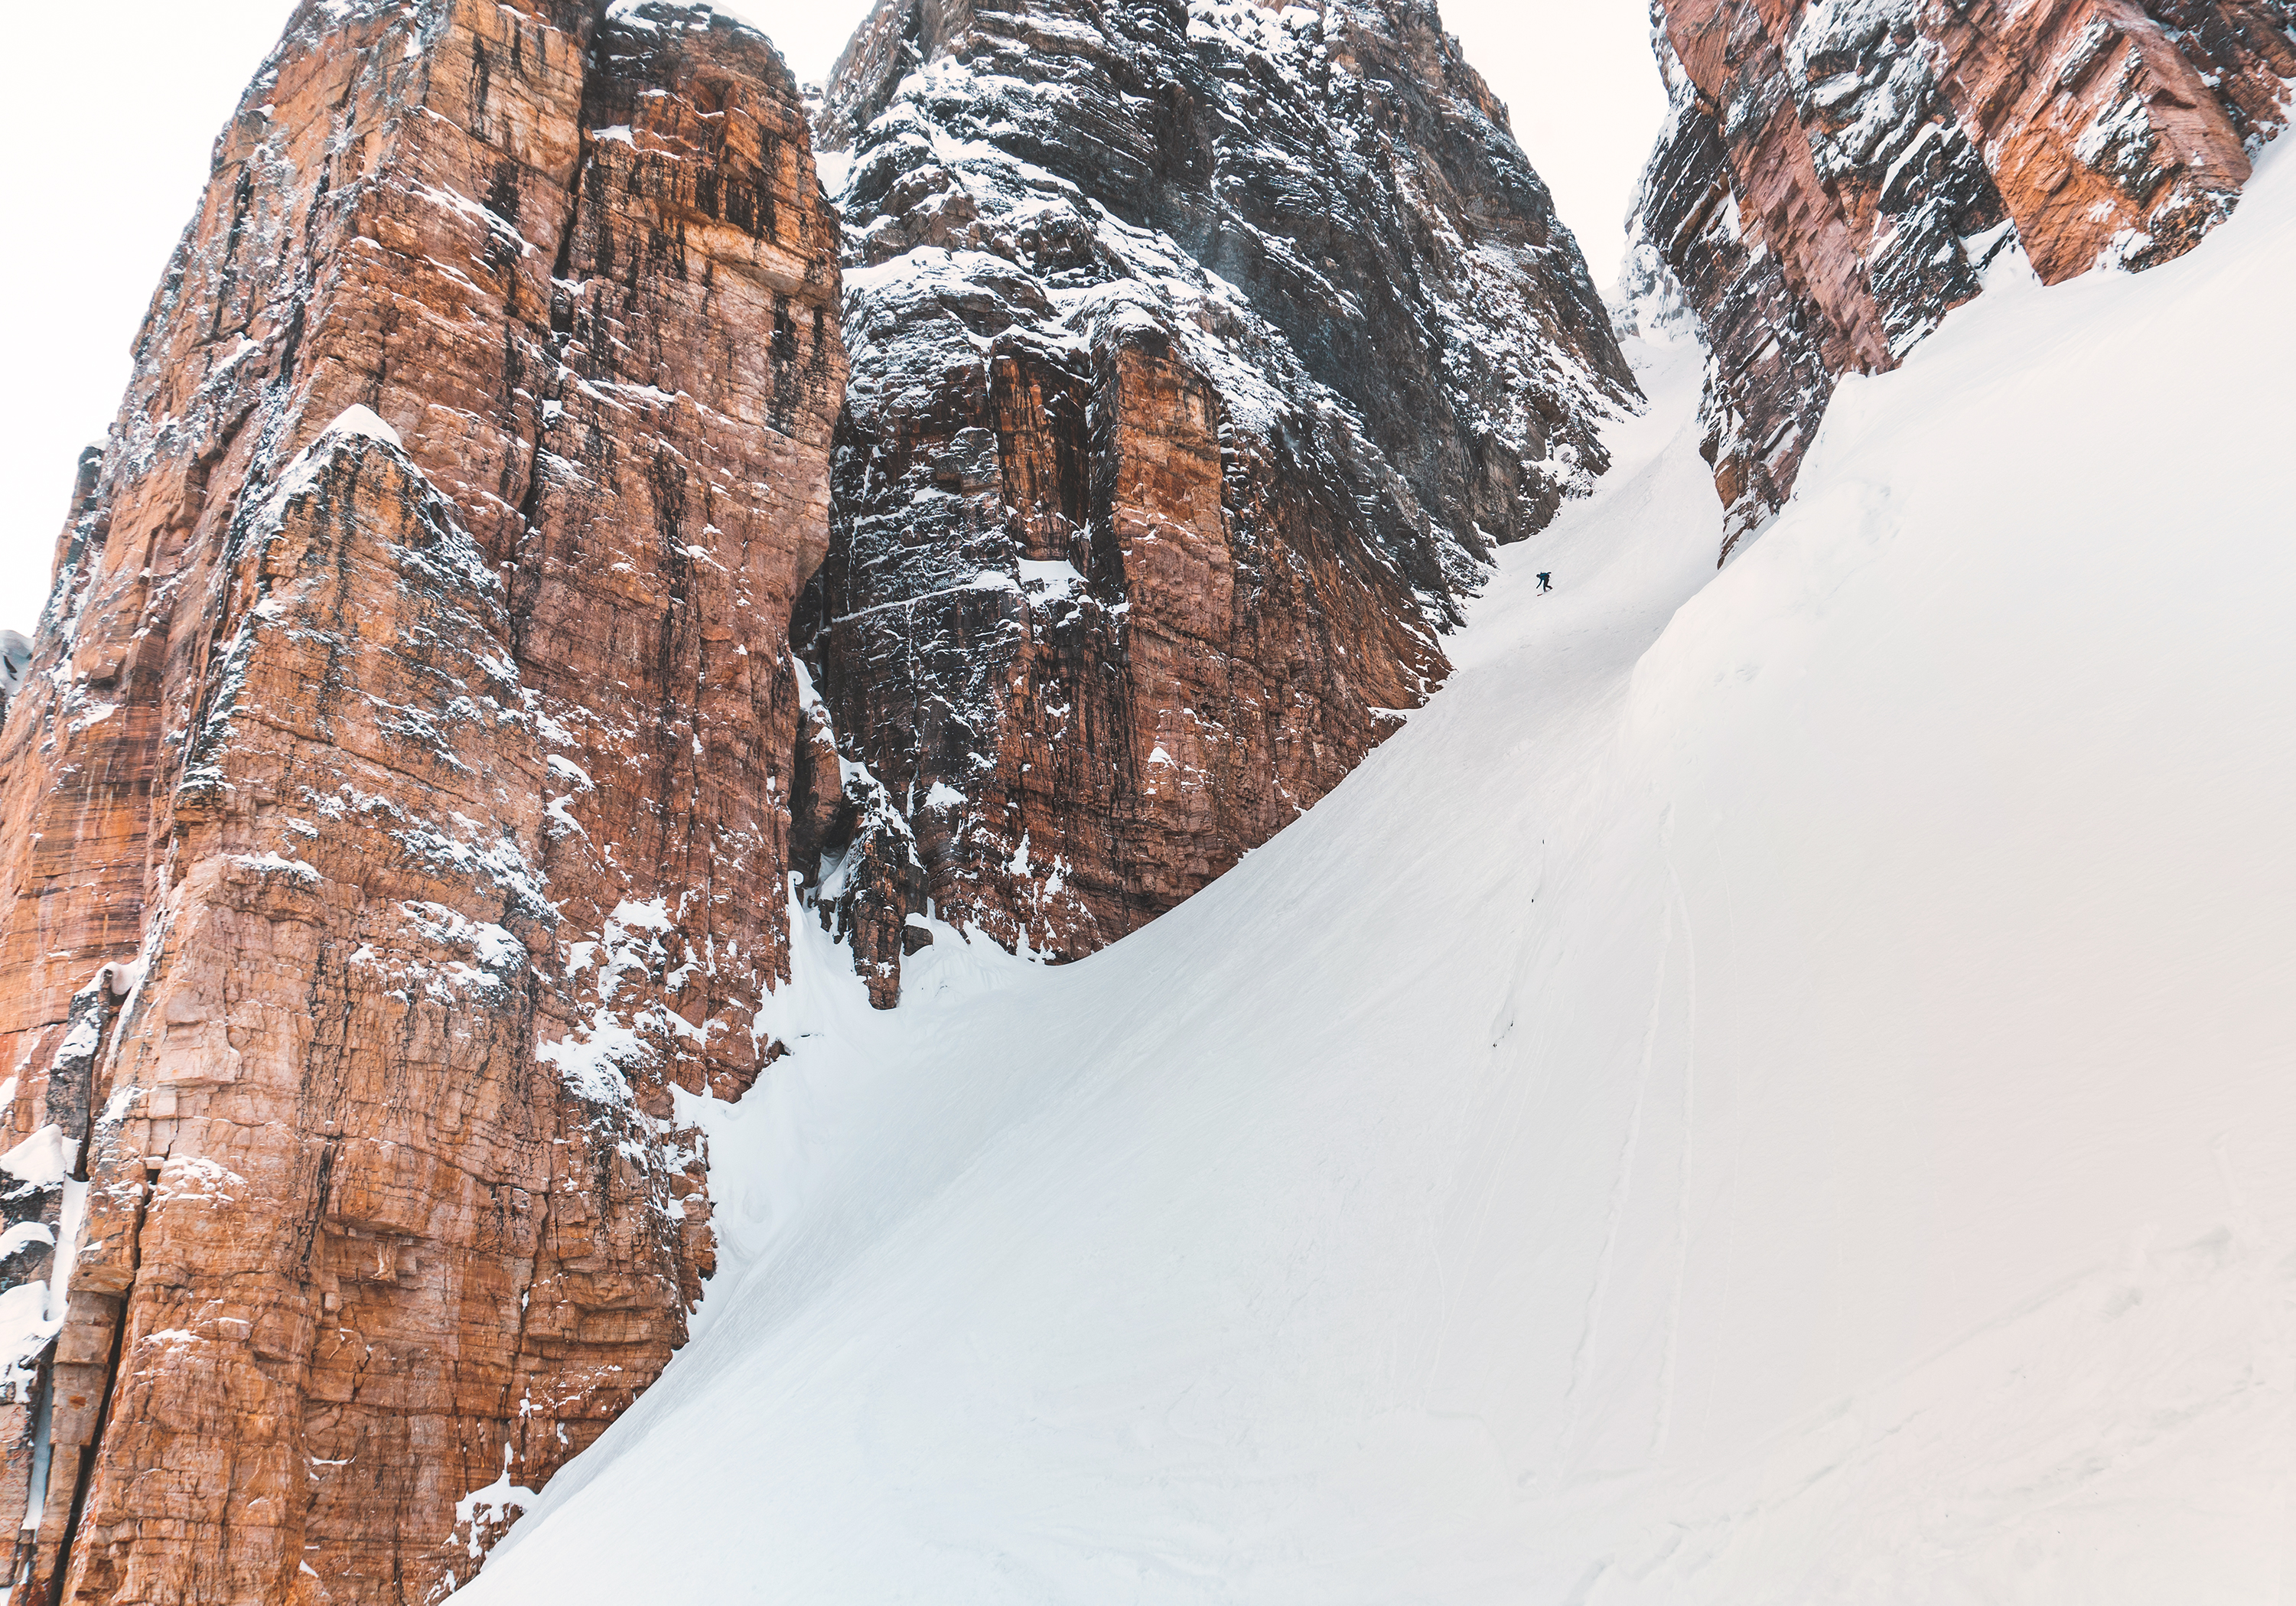 The bottom of the Grand daddy Couloir